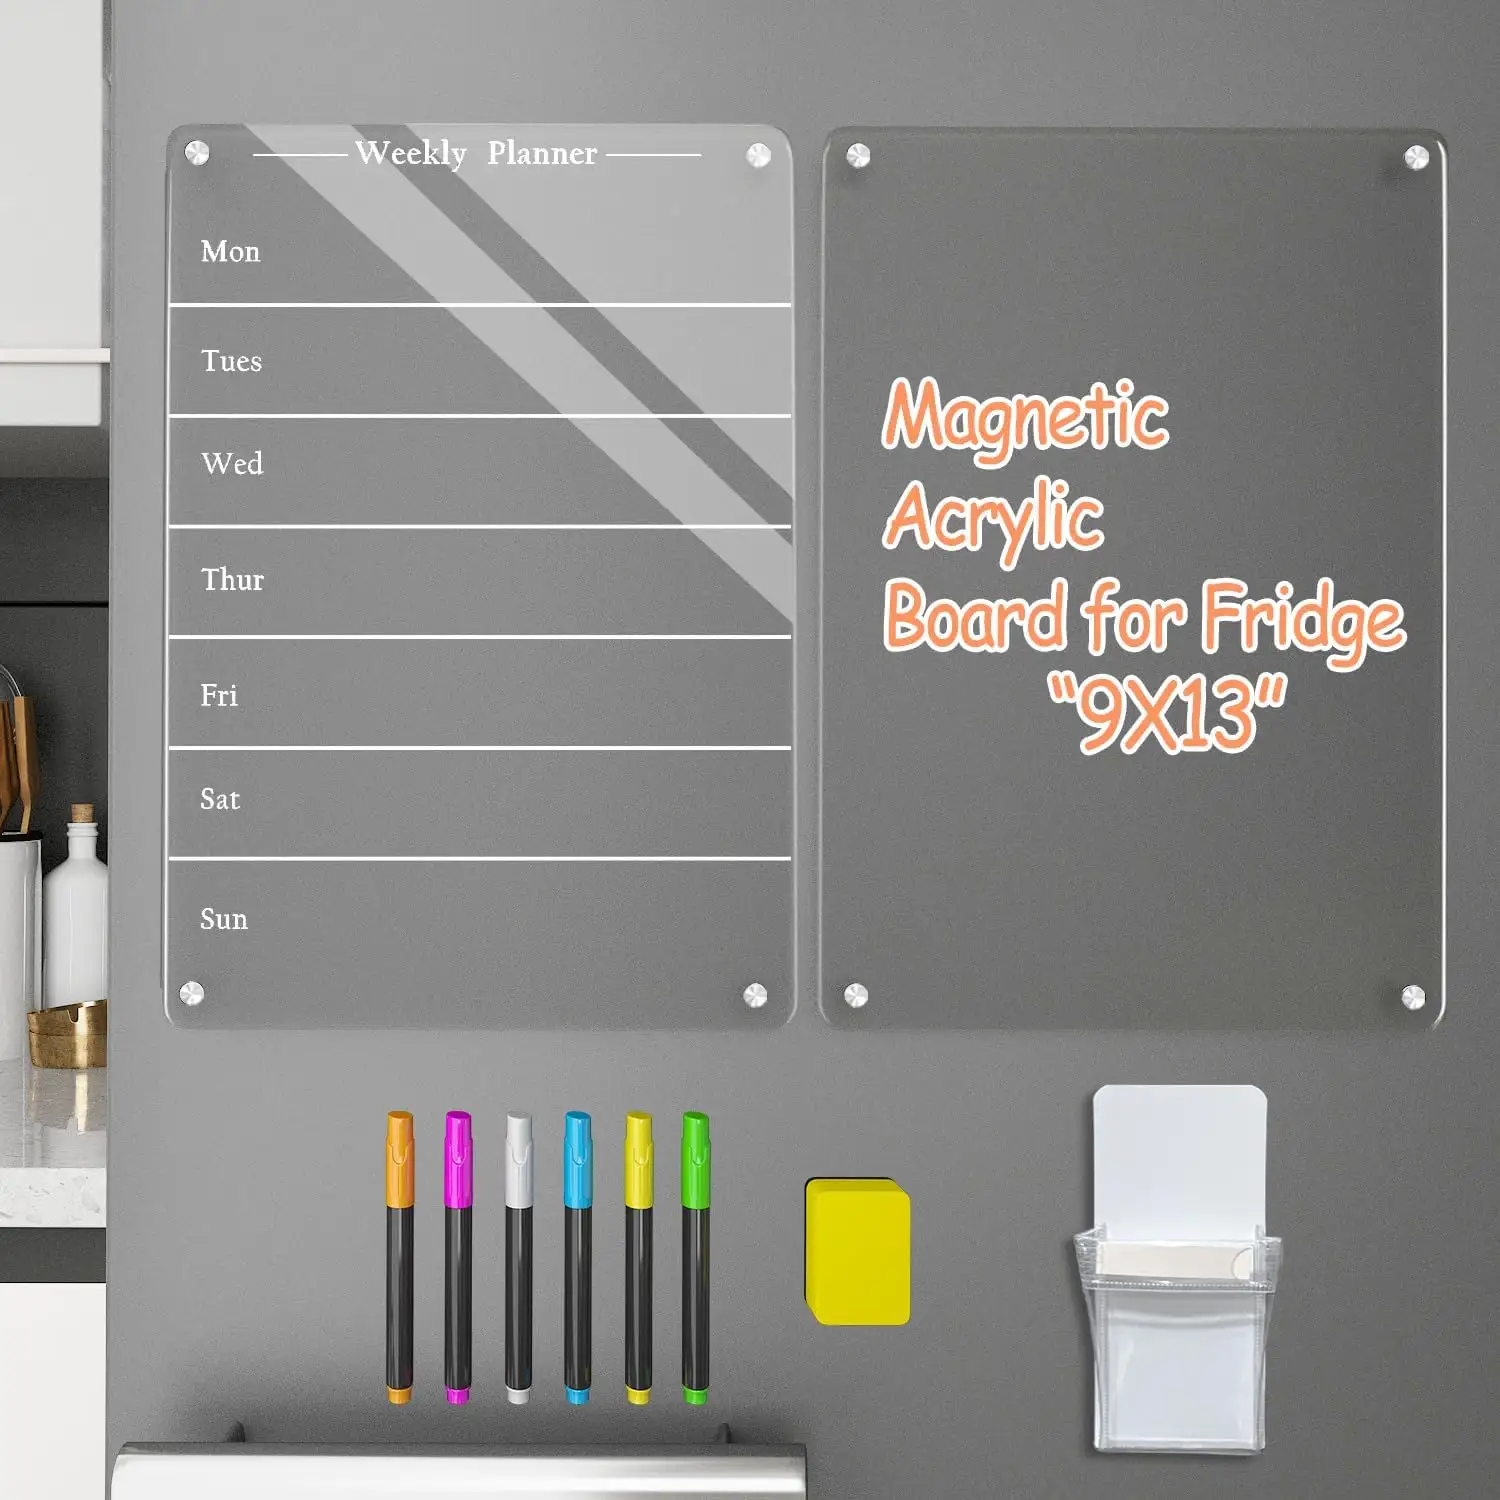 2 PCS 9 "x 13" Transparent Weekly Meal Planner Magnetic Acrylic Board,Acrylic Magnetic Dry Erase Board for Fridge, Magnet Week Calendar